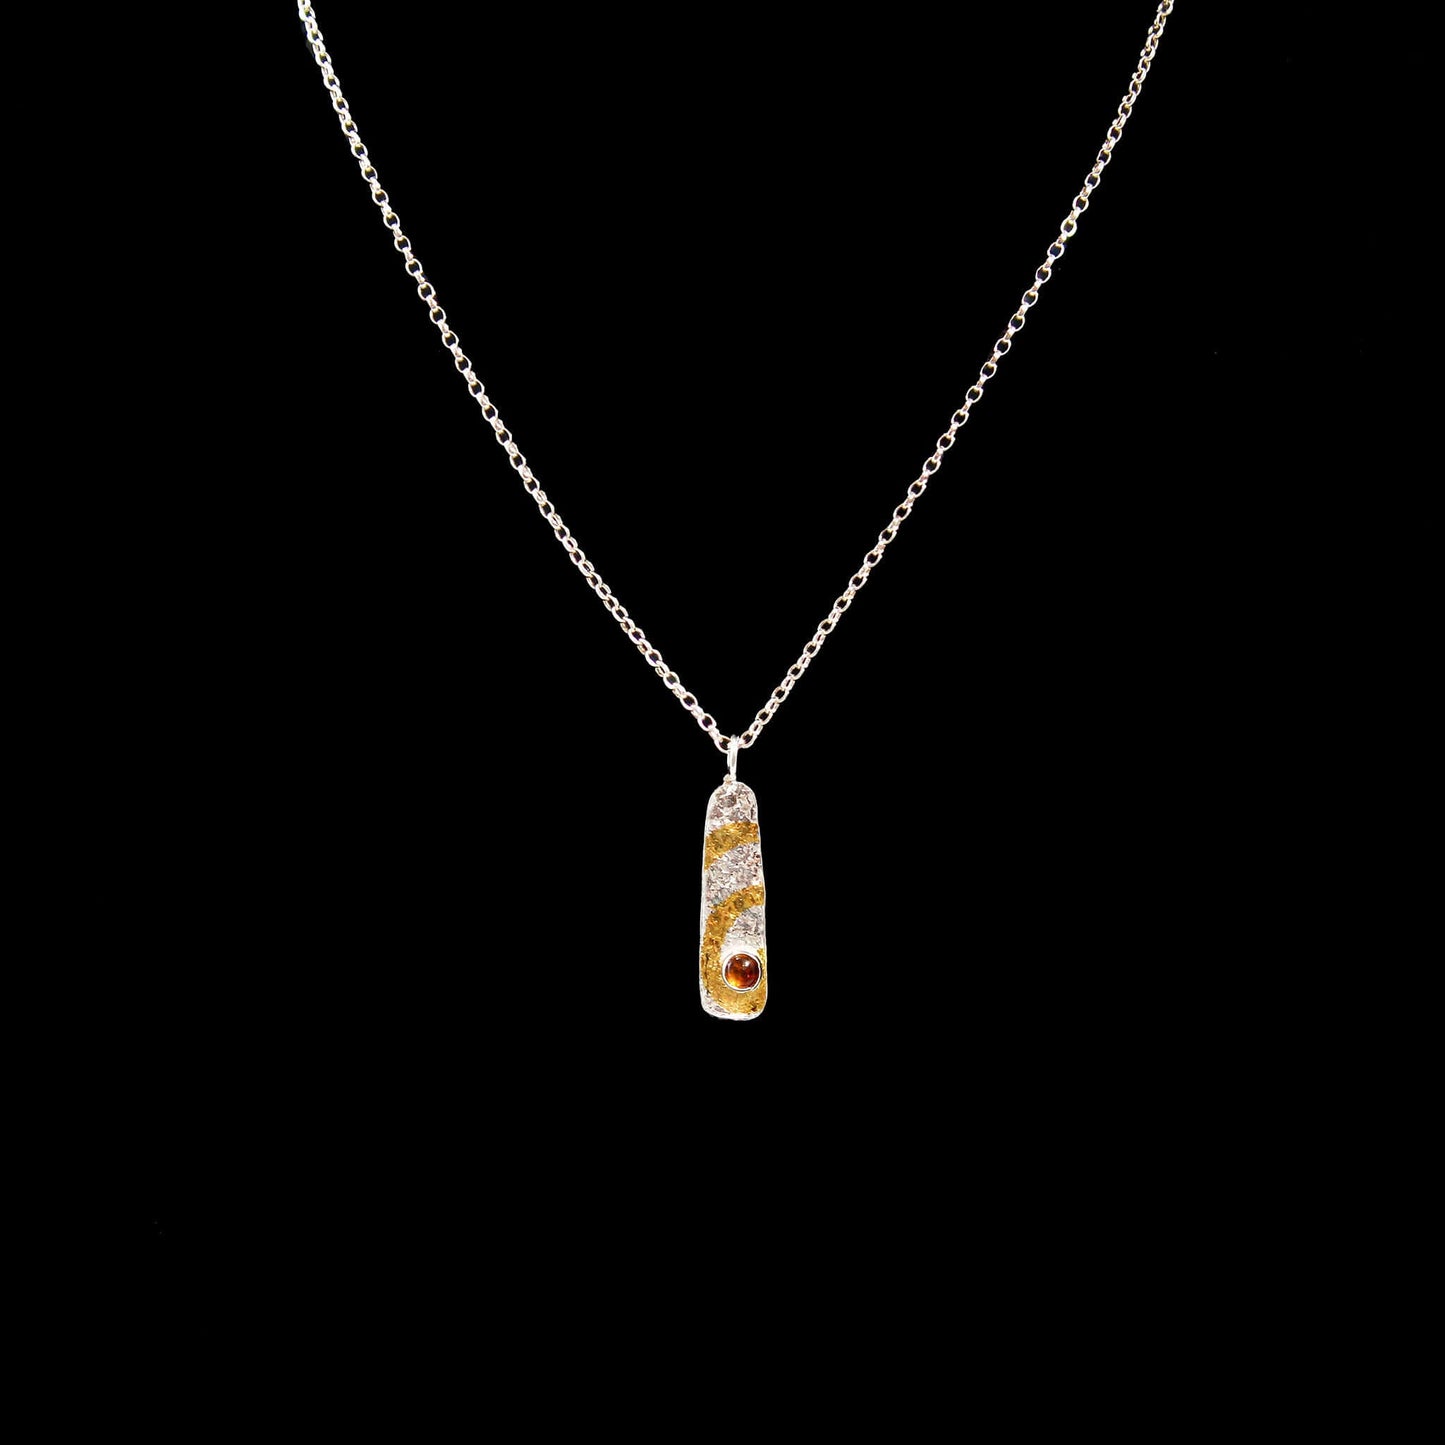 Close up of An Ghrian Pendant showing citrine and gold Keum Boo spiral detail by Atlantic Rose